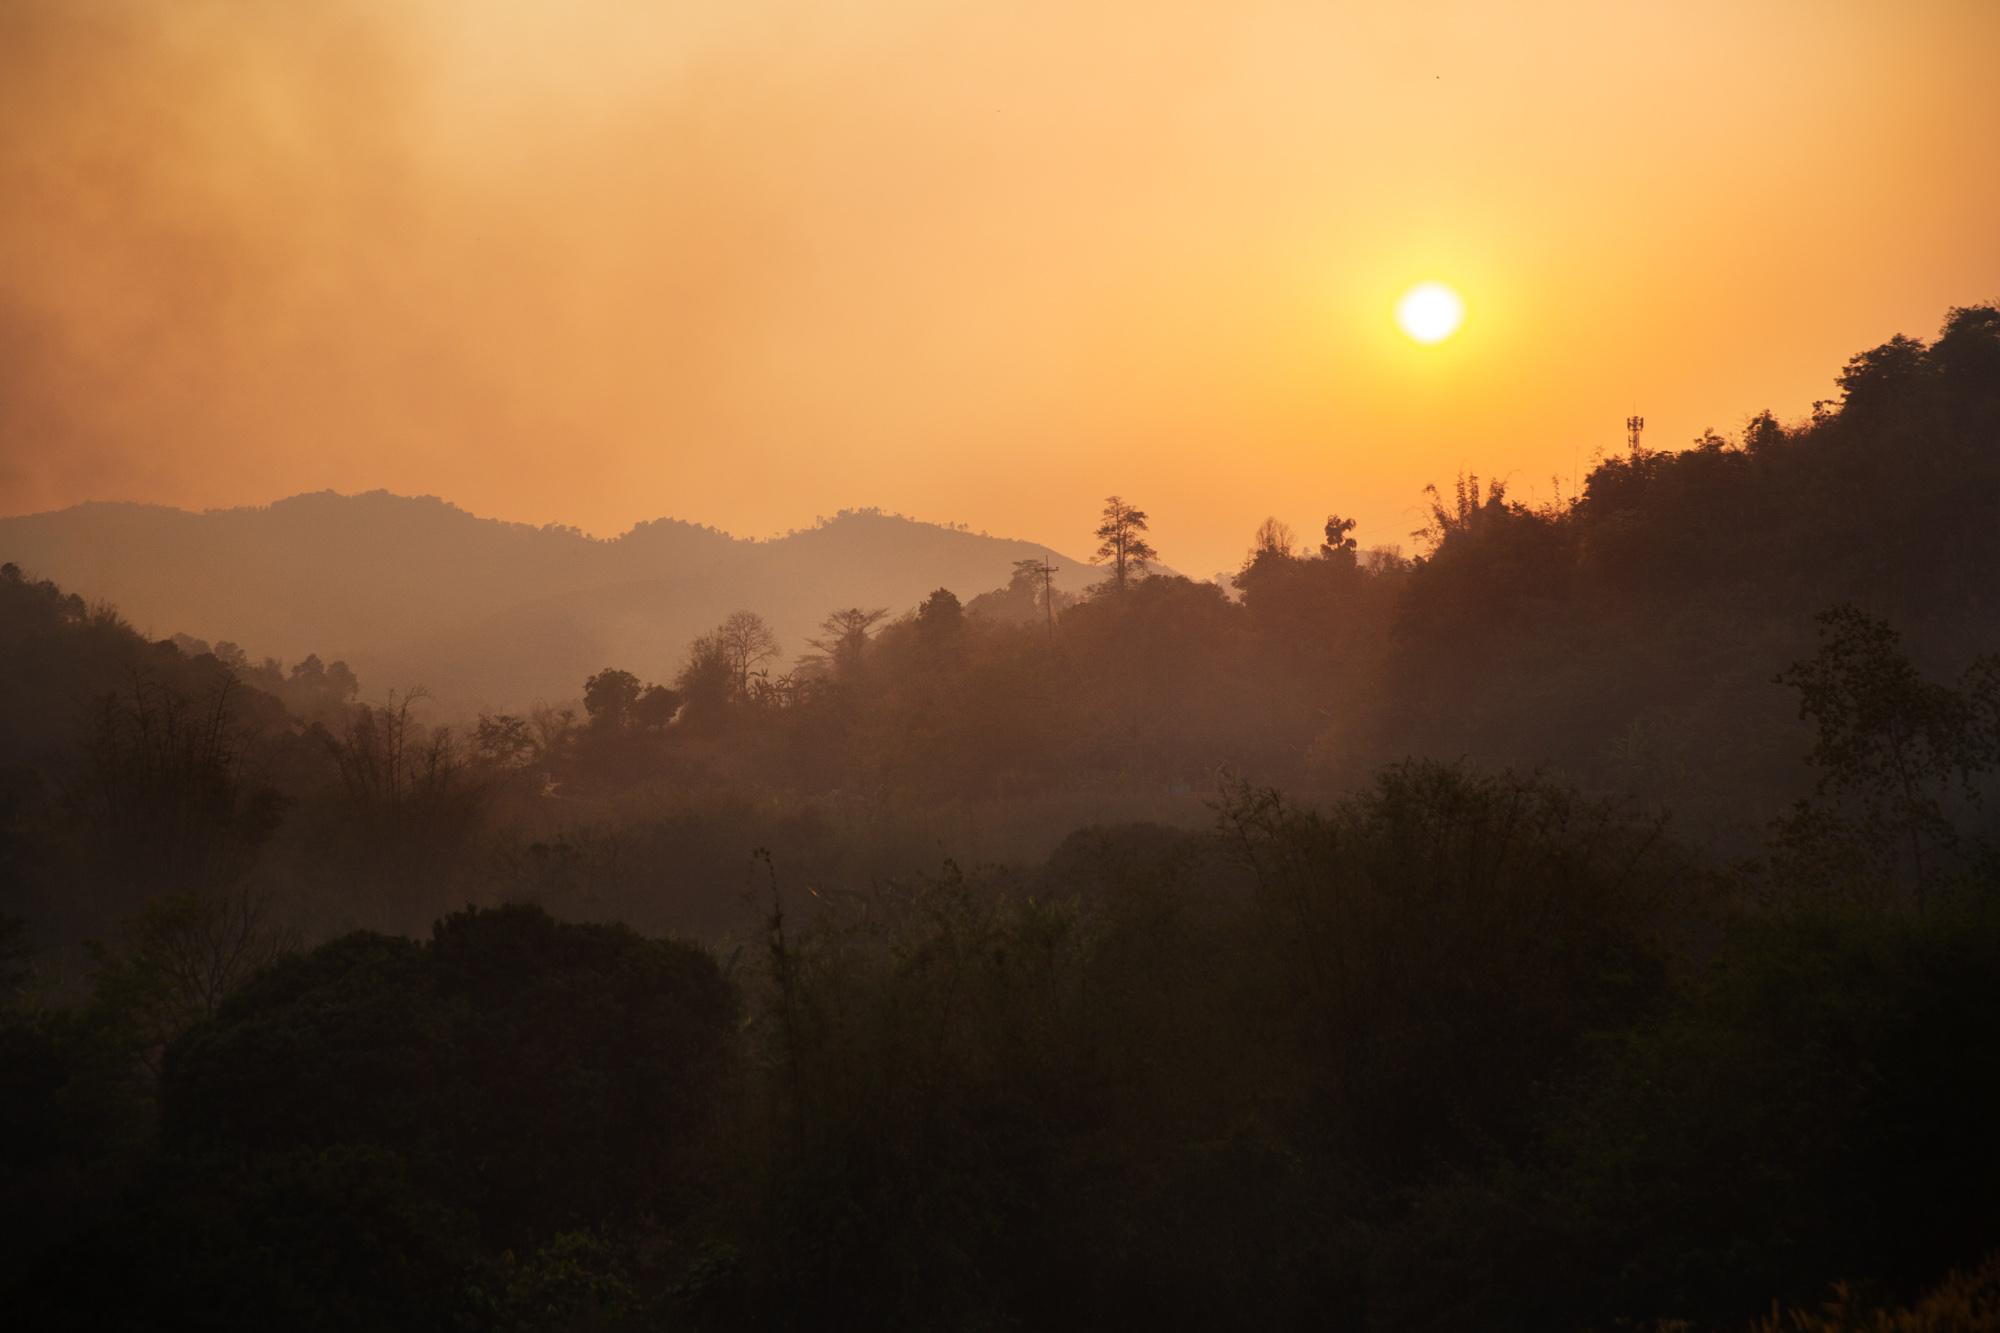 Smoke from multiple forest fires fills the air over a mountain range at sunset near the Thai-Myanmar border, April 2019.